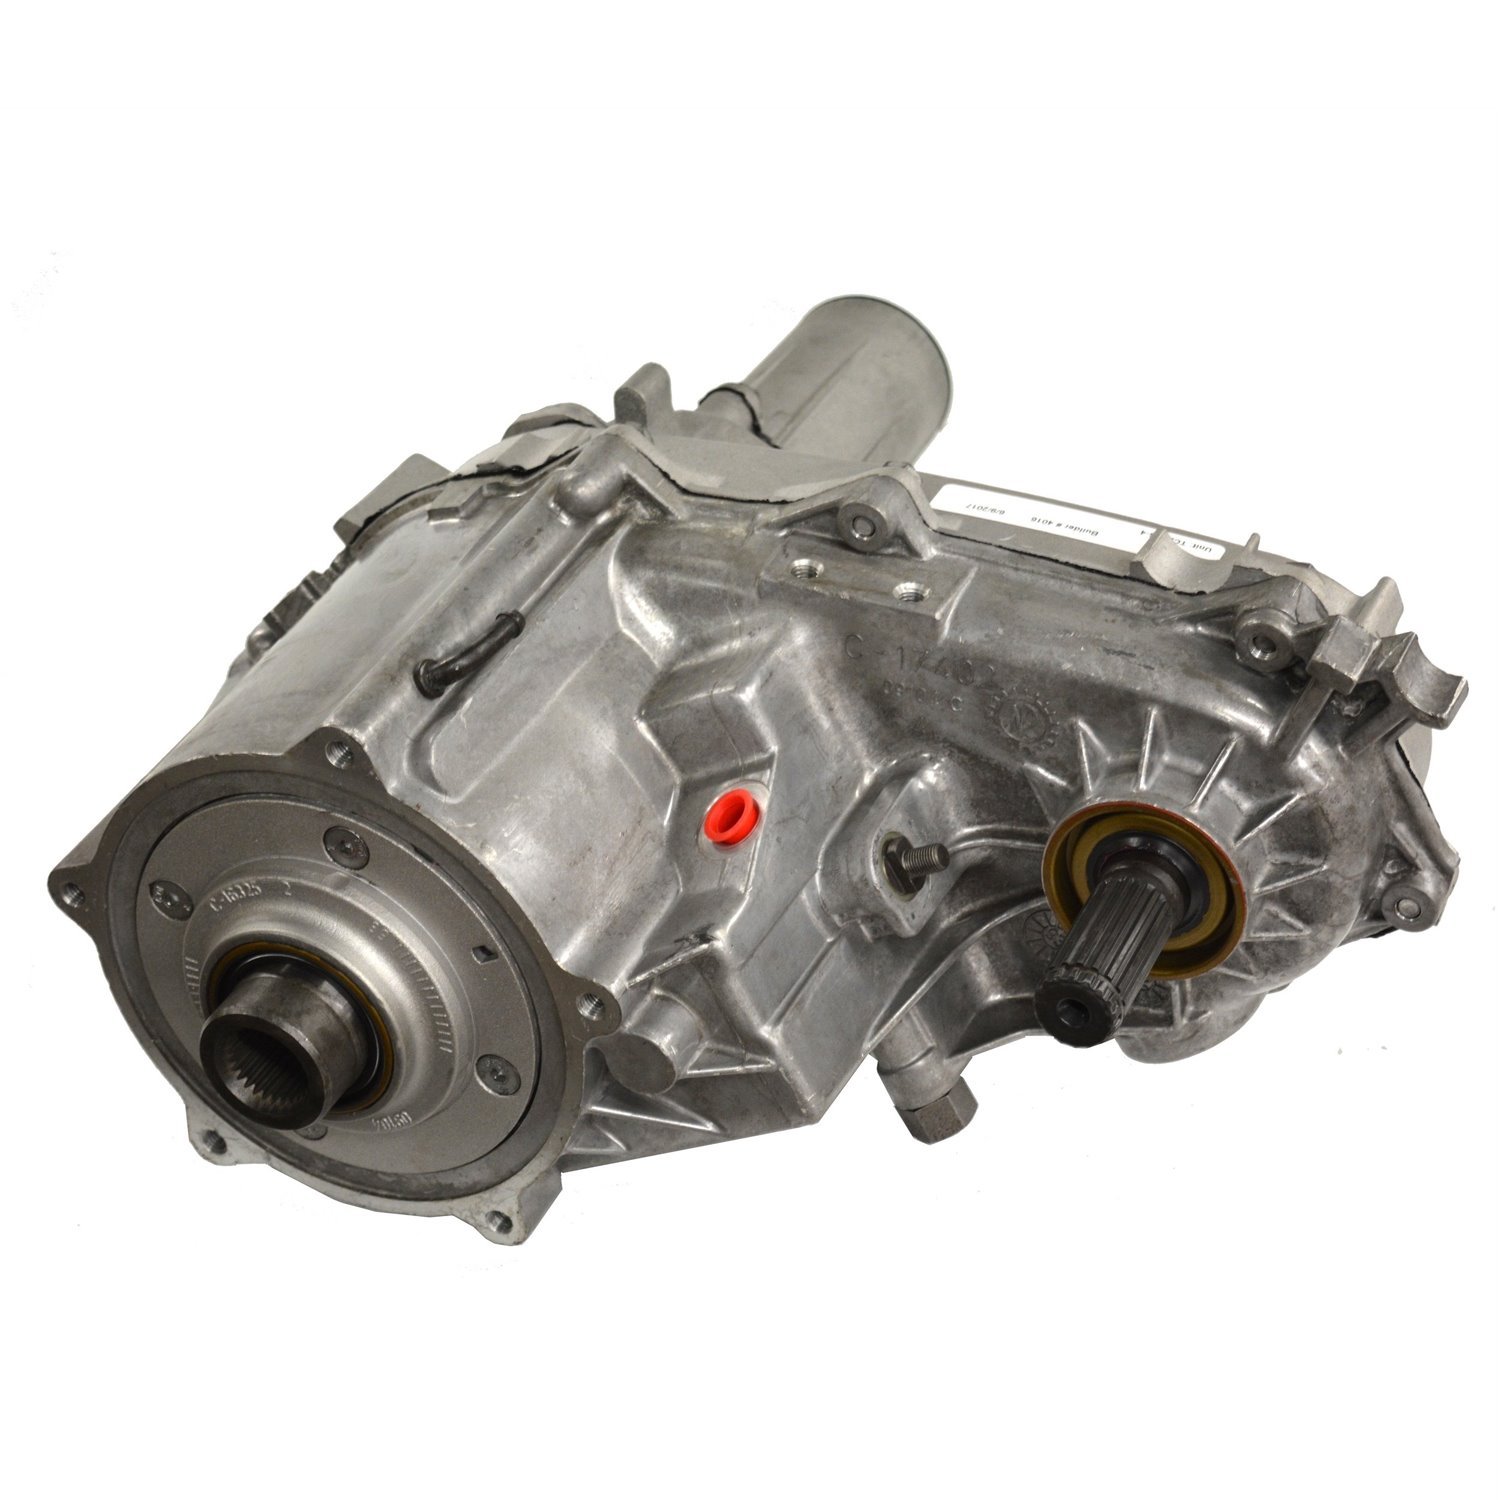 Remanufactured NP231 Transfer Case for GM 94-95 S10